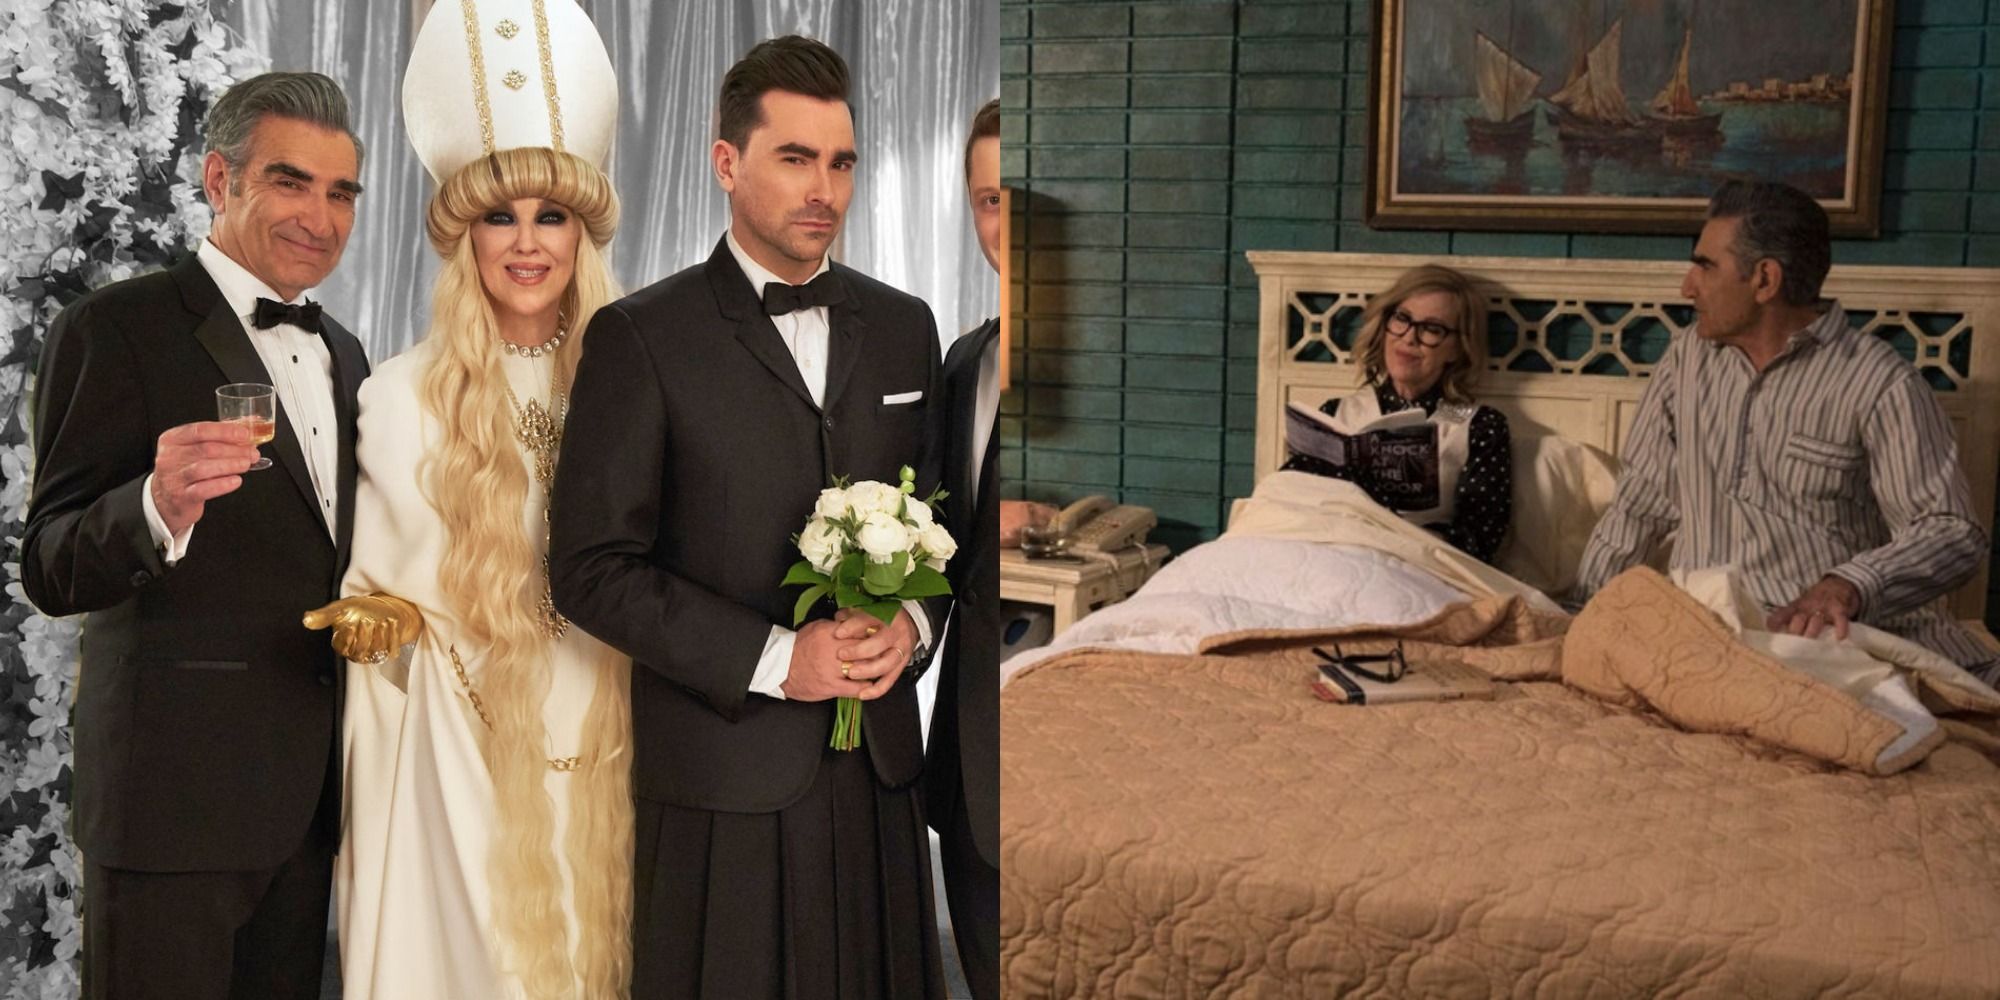 Split image of Johnny, Moira and David on his wedding day/Moira and Johnny in bed